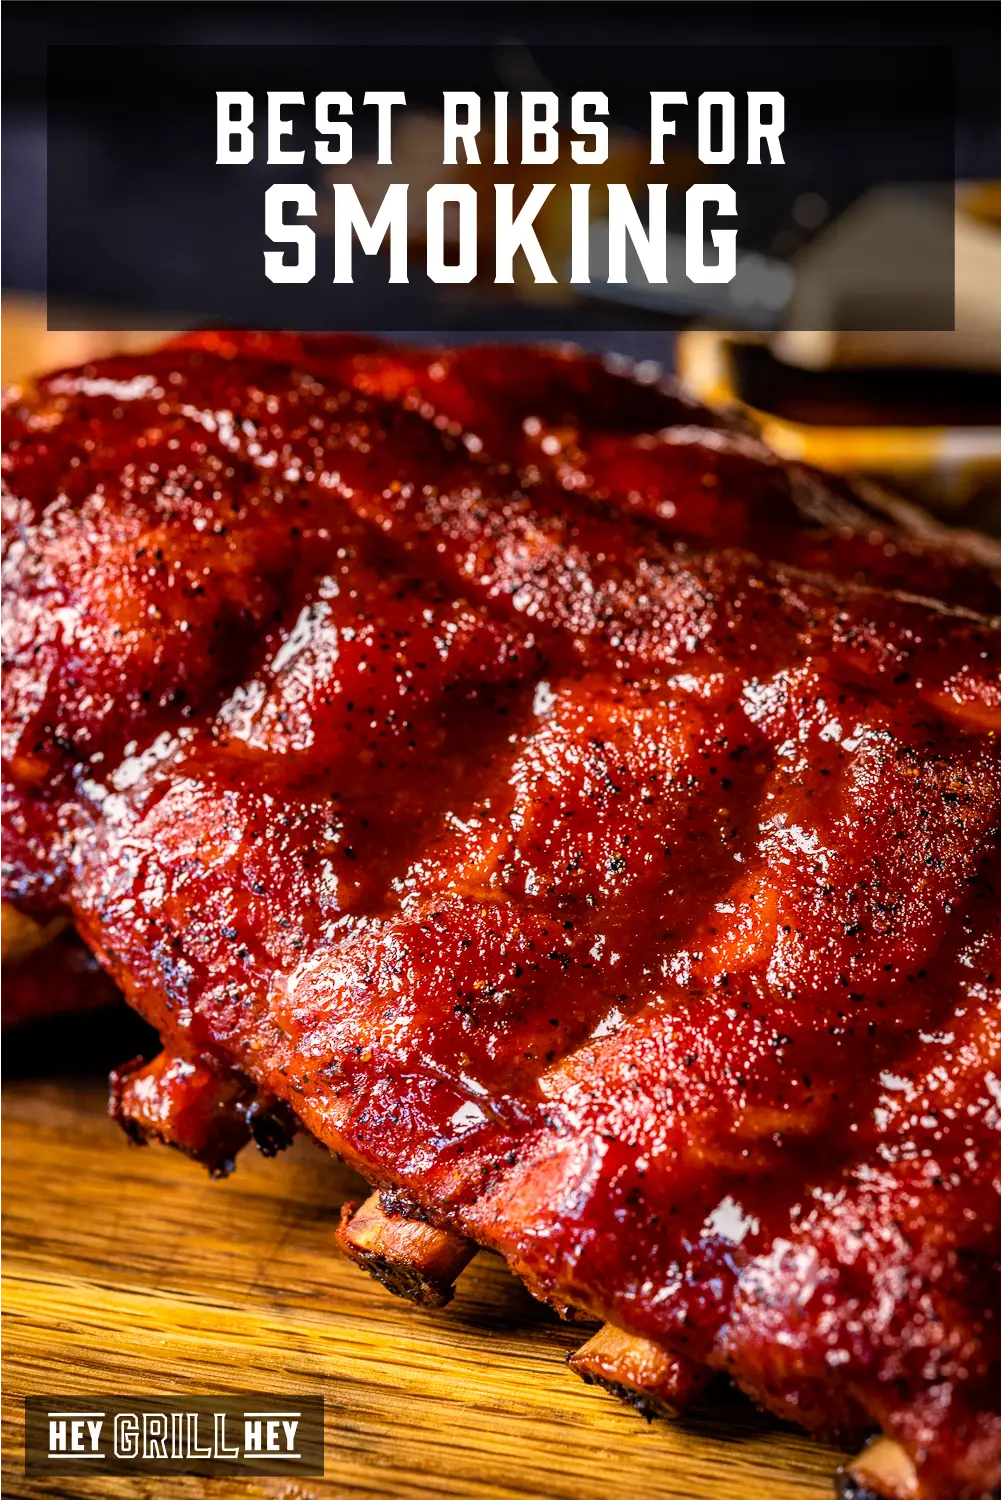 best smoked ribs - What are the best ribs for smoking